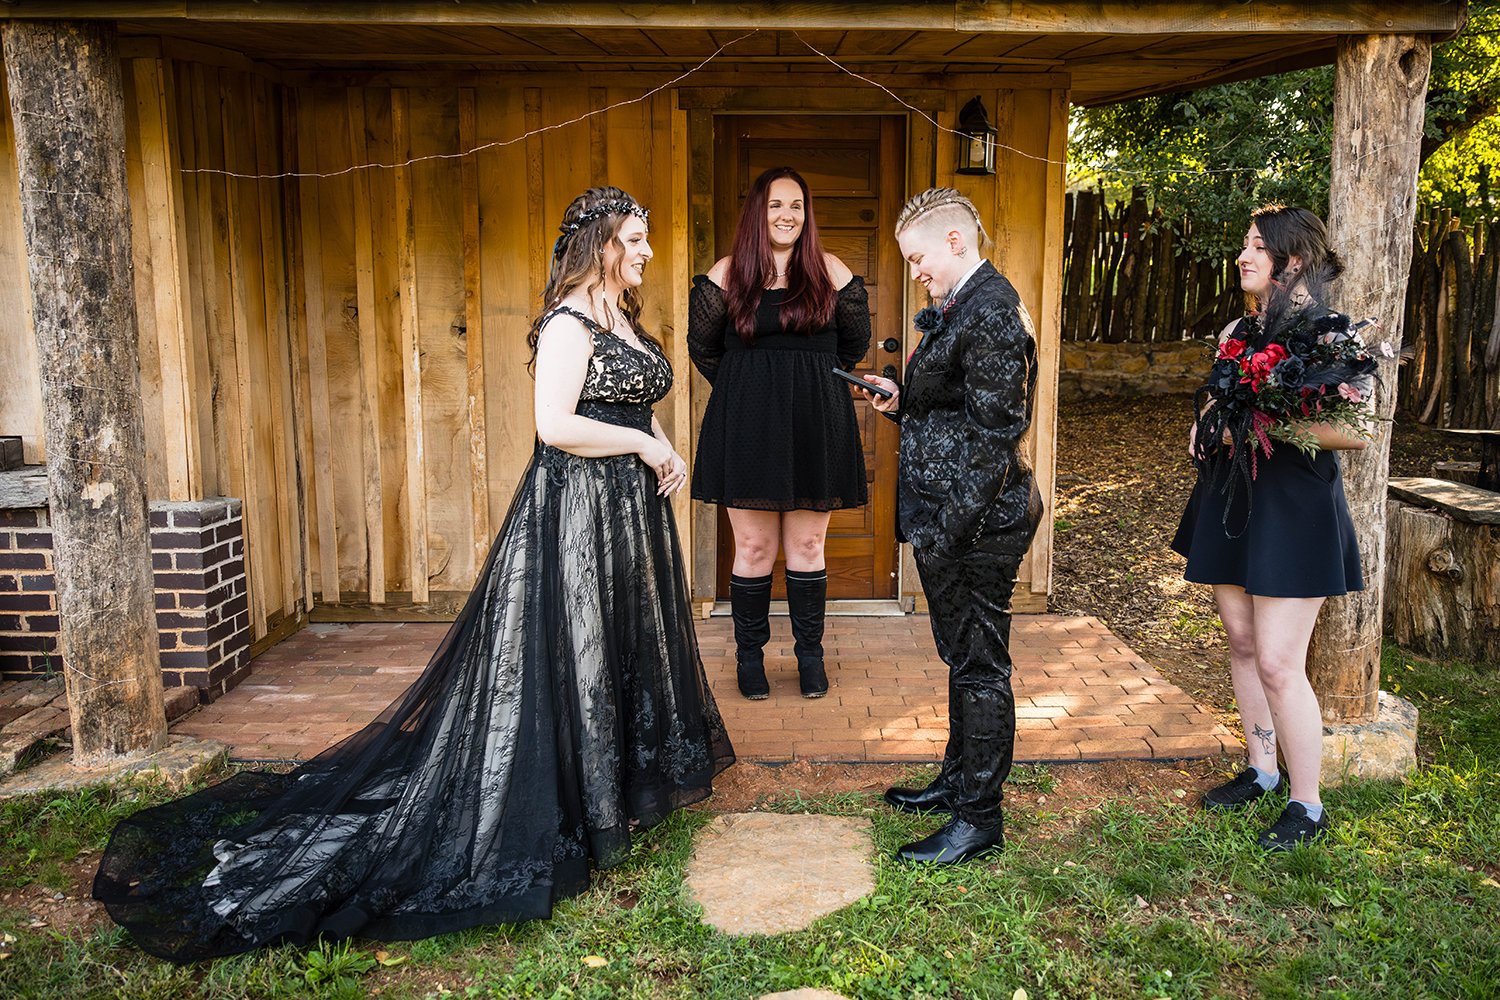 A lesbian couple exchanges their vows during a backyard wedding ceremony with close friends at their Airbnb.